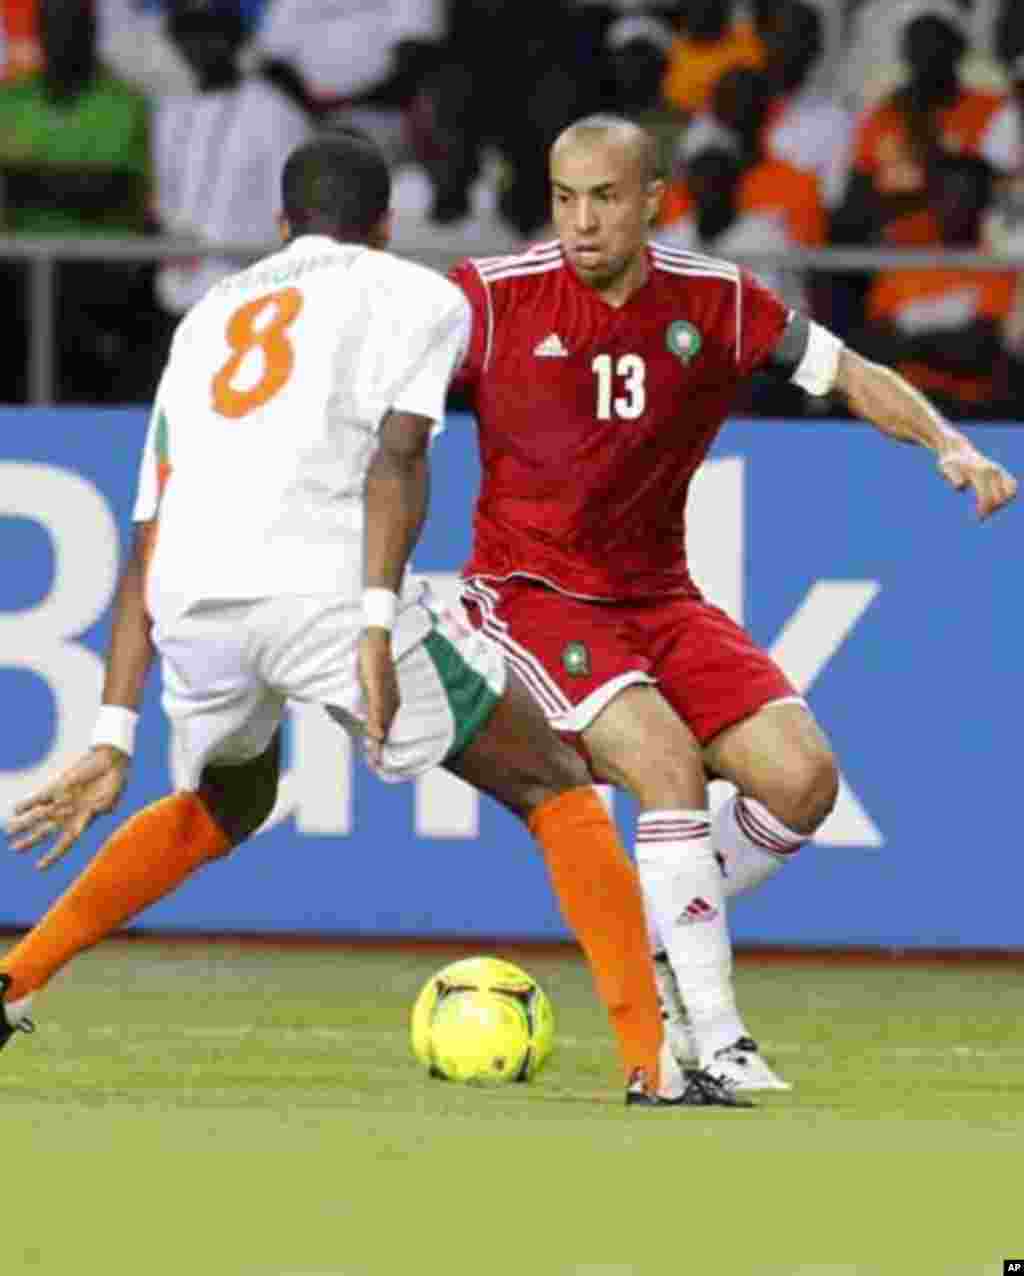 Morocco's Houssine Kharja (13) dribbles the ball against Niger's Harouna Olivier (8) during their final African Cup of Nations Group C soccer match at the Stade De L'Amitie Stadium in Libreville, Gabon January 31, 2012.